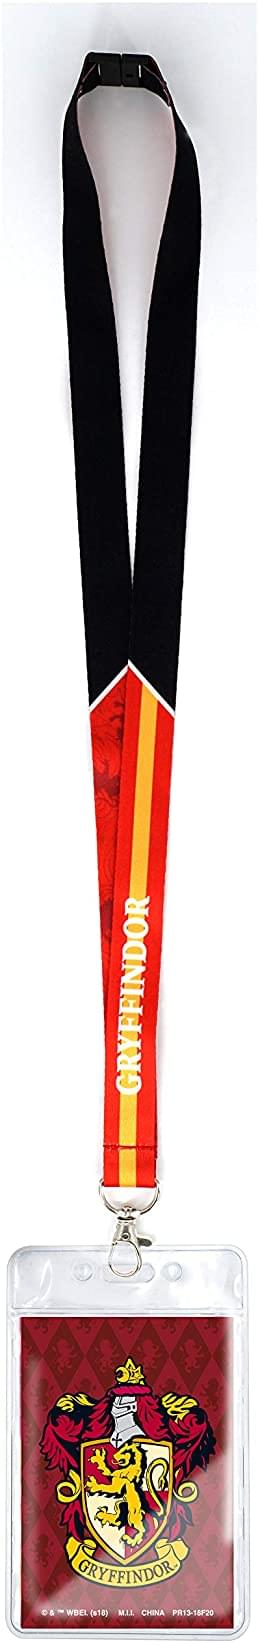 Harry Potter House Gryffindor Lanyard With Breakaway Strap